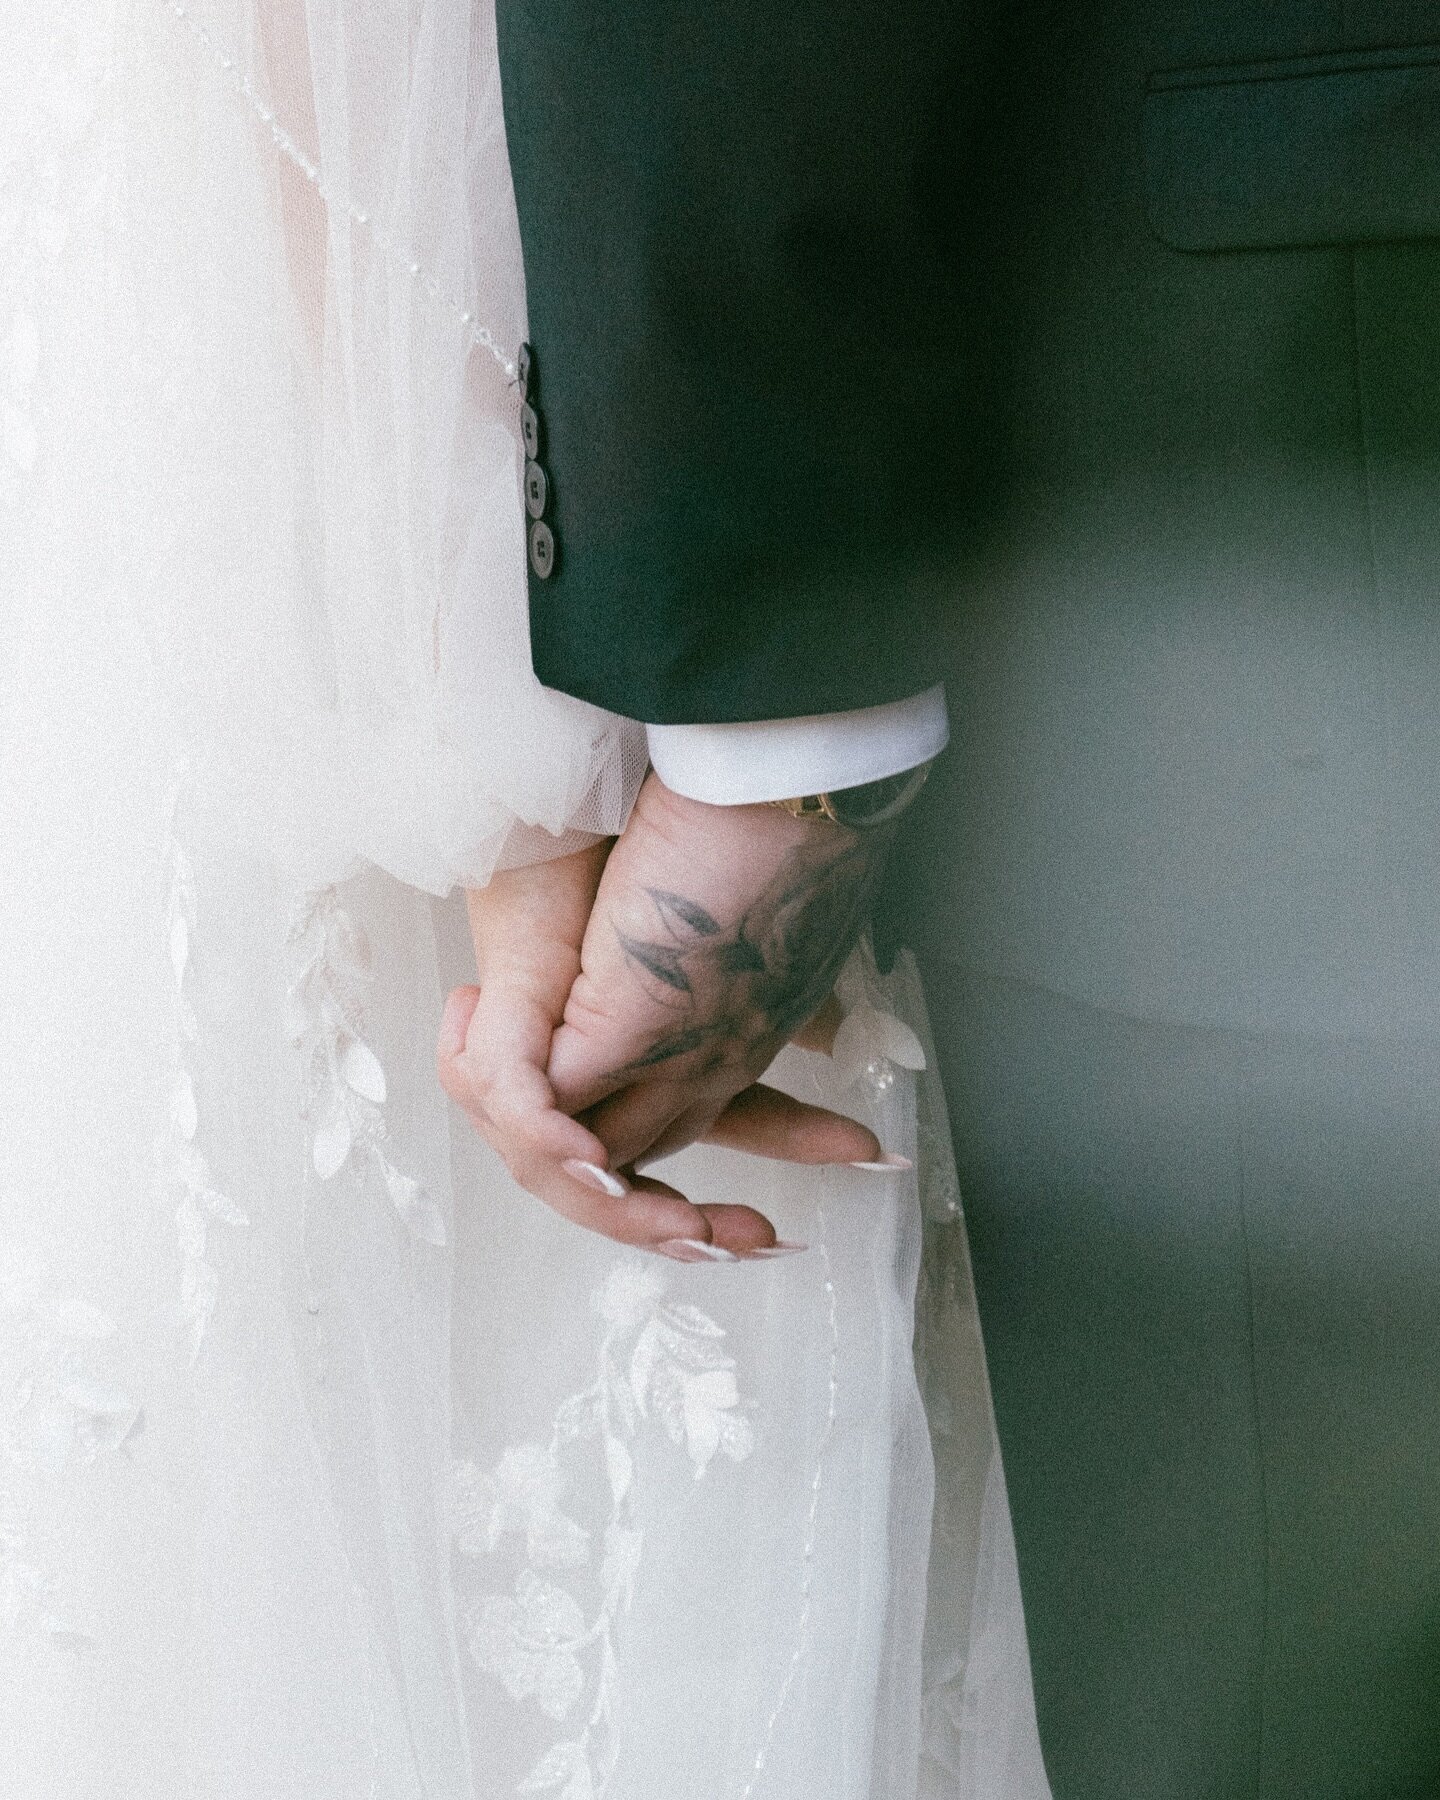 I&rsquo;ve said it once and I&rsquo;ll say it again. I love photographing a couples hands. The hands can show so much expression and this sweet couple was no different. This image was taken shortly before their ceremony began. 

Second shot for @thep